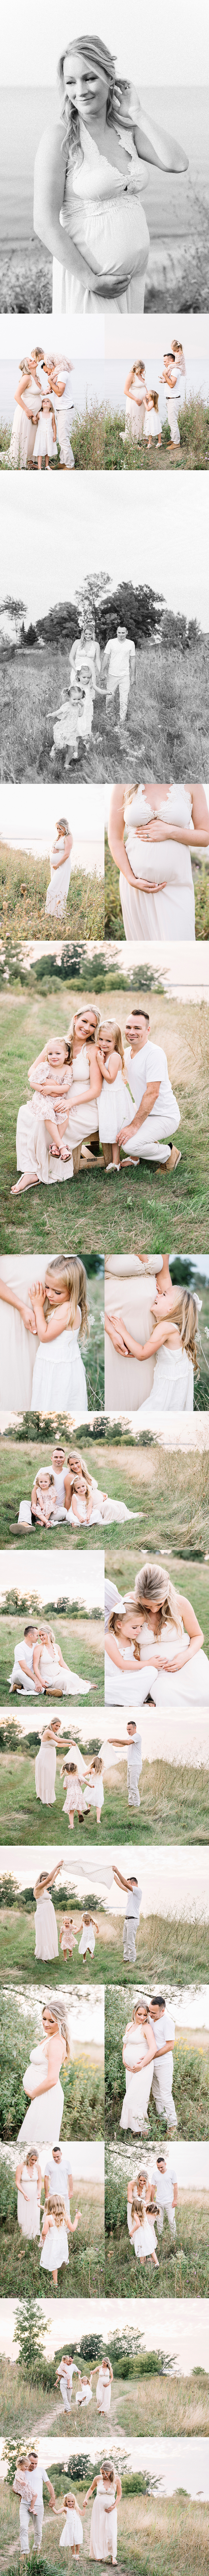 beautiful outdoor maternity session with siblings at sunset